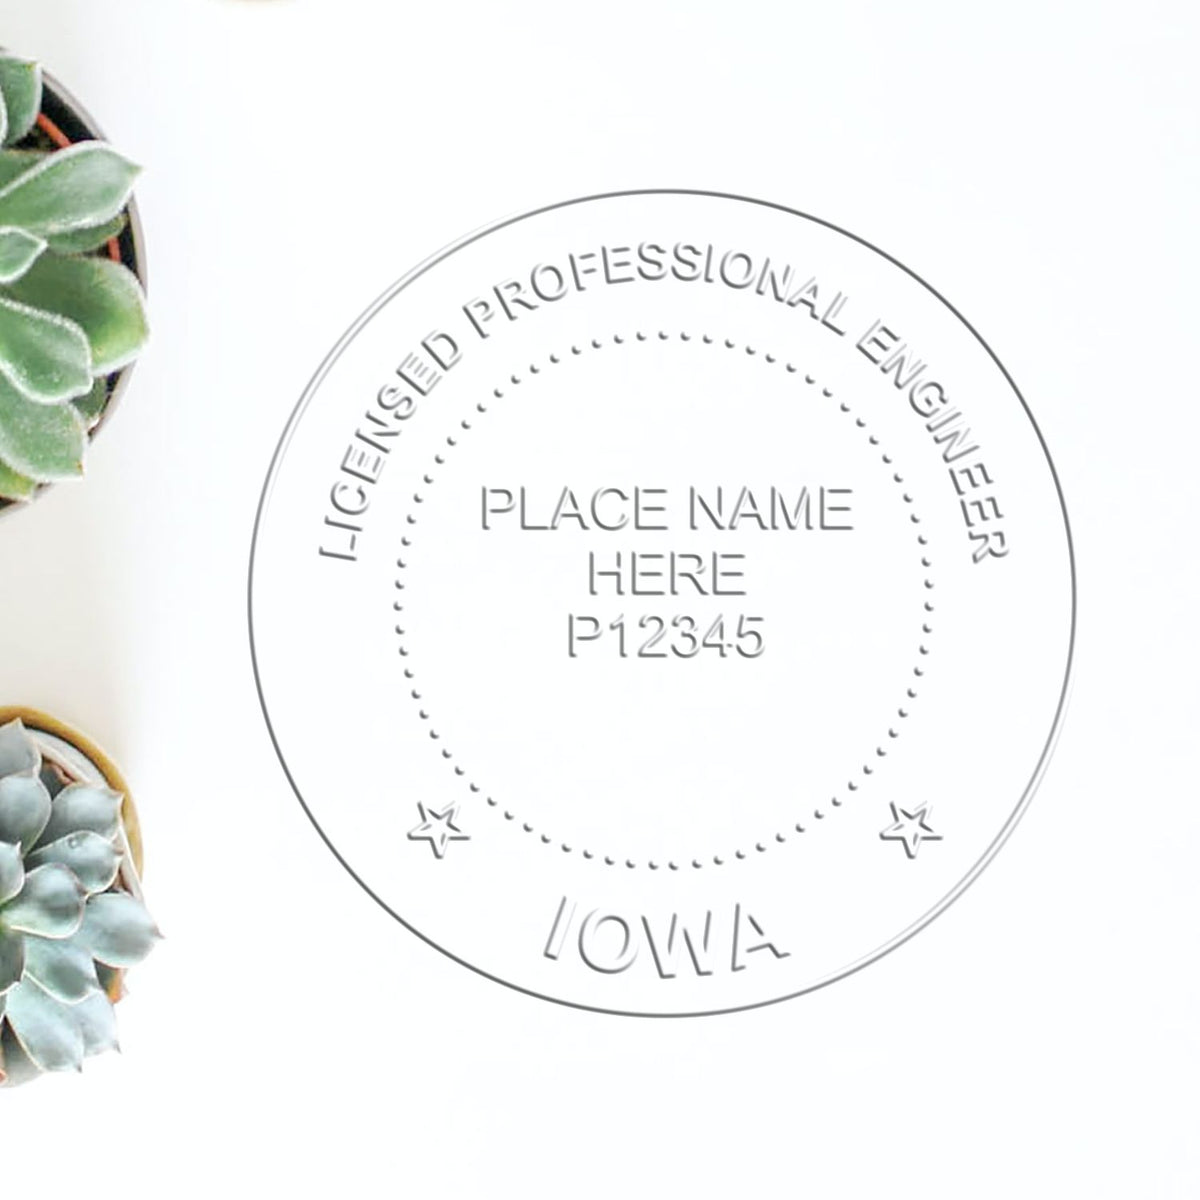 A stamped impression of the Long Reach Iowa PE Seal in this stylish lifestyle photo, setting the tone for a unique and personalized product.